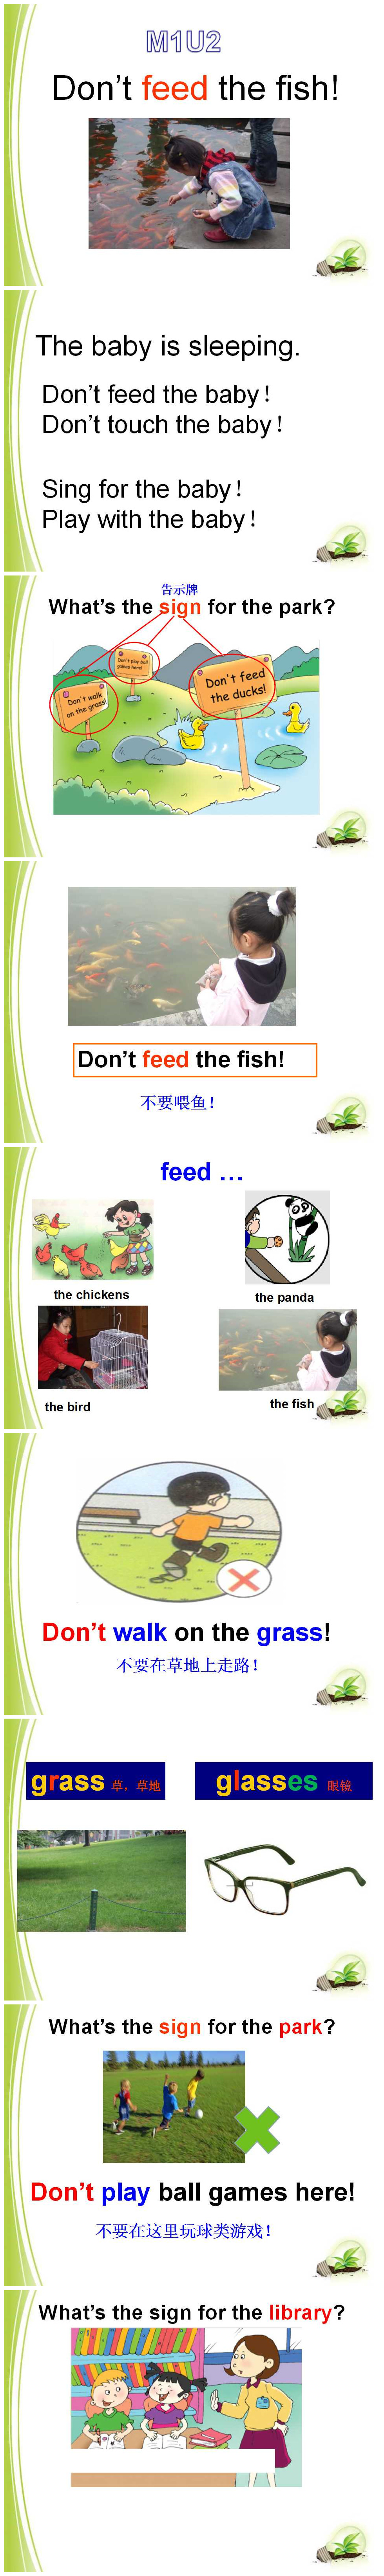 《Don't feed the fish》PPT课件3